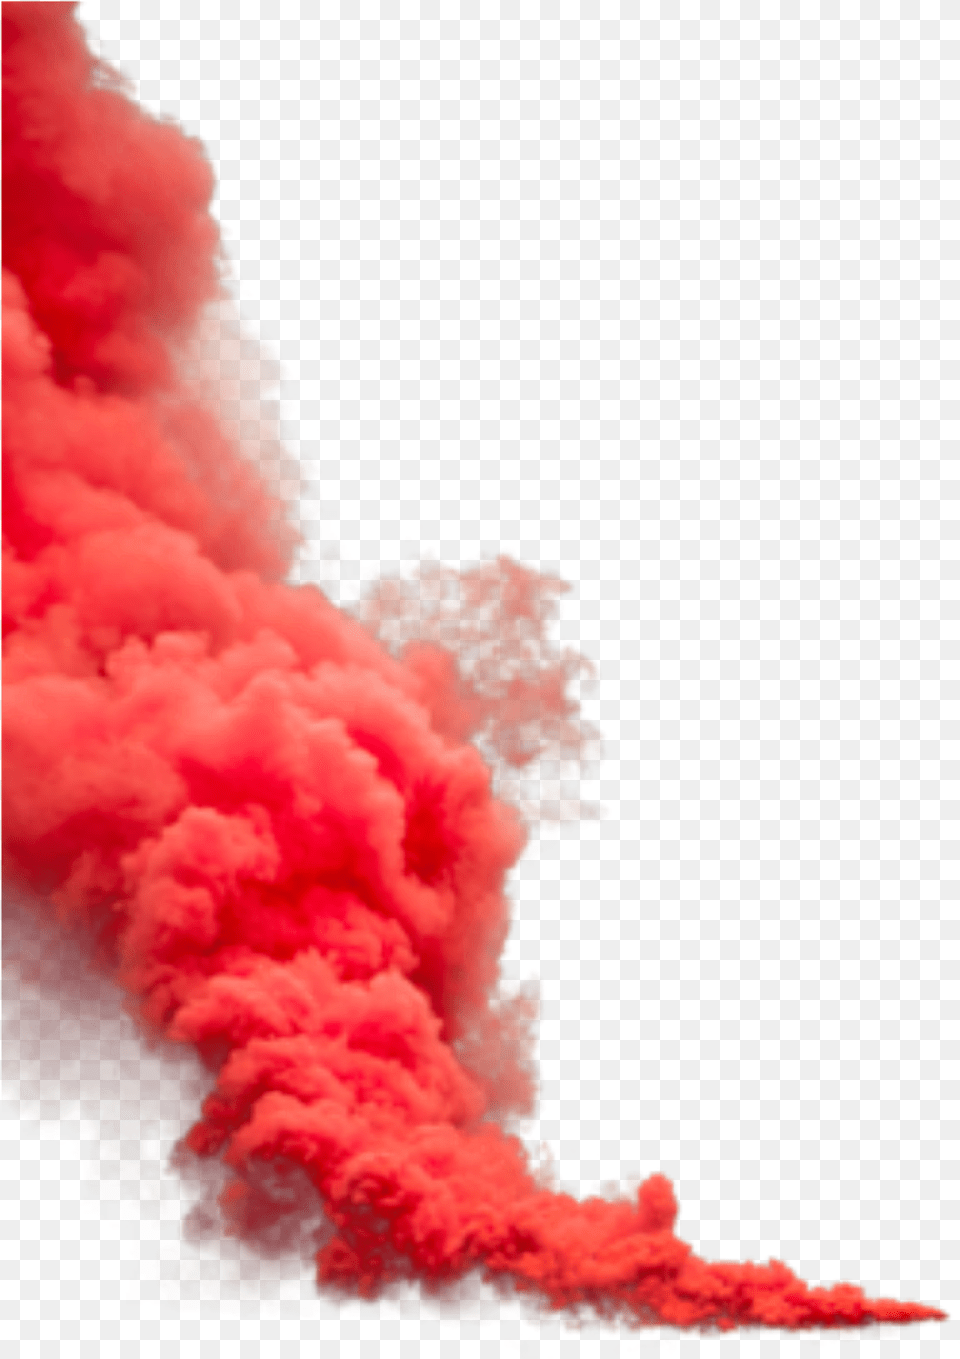 Best Smoke Bomb Editing In Picsart Viral Complete Image, Outdoors, Nature Free Png